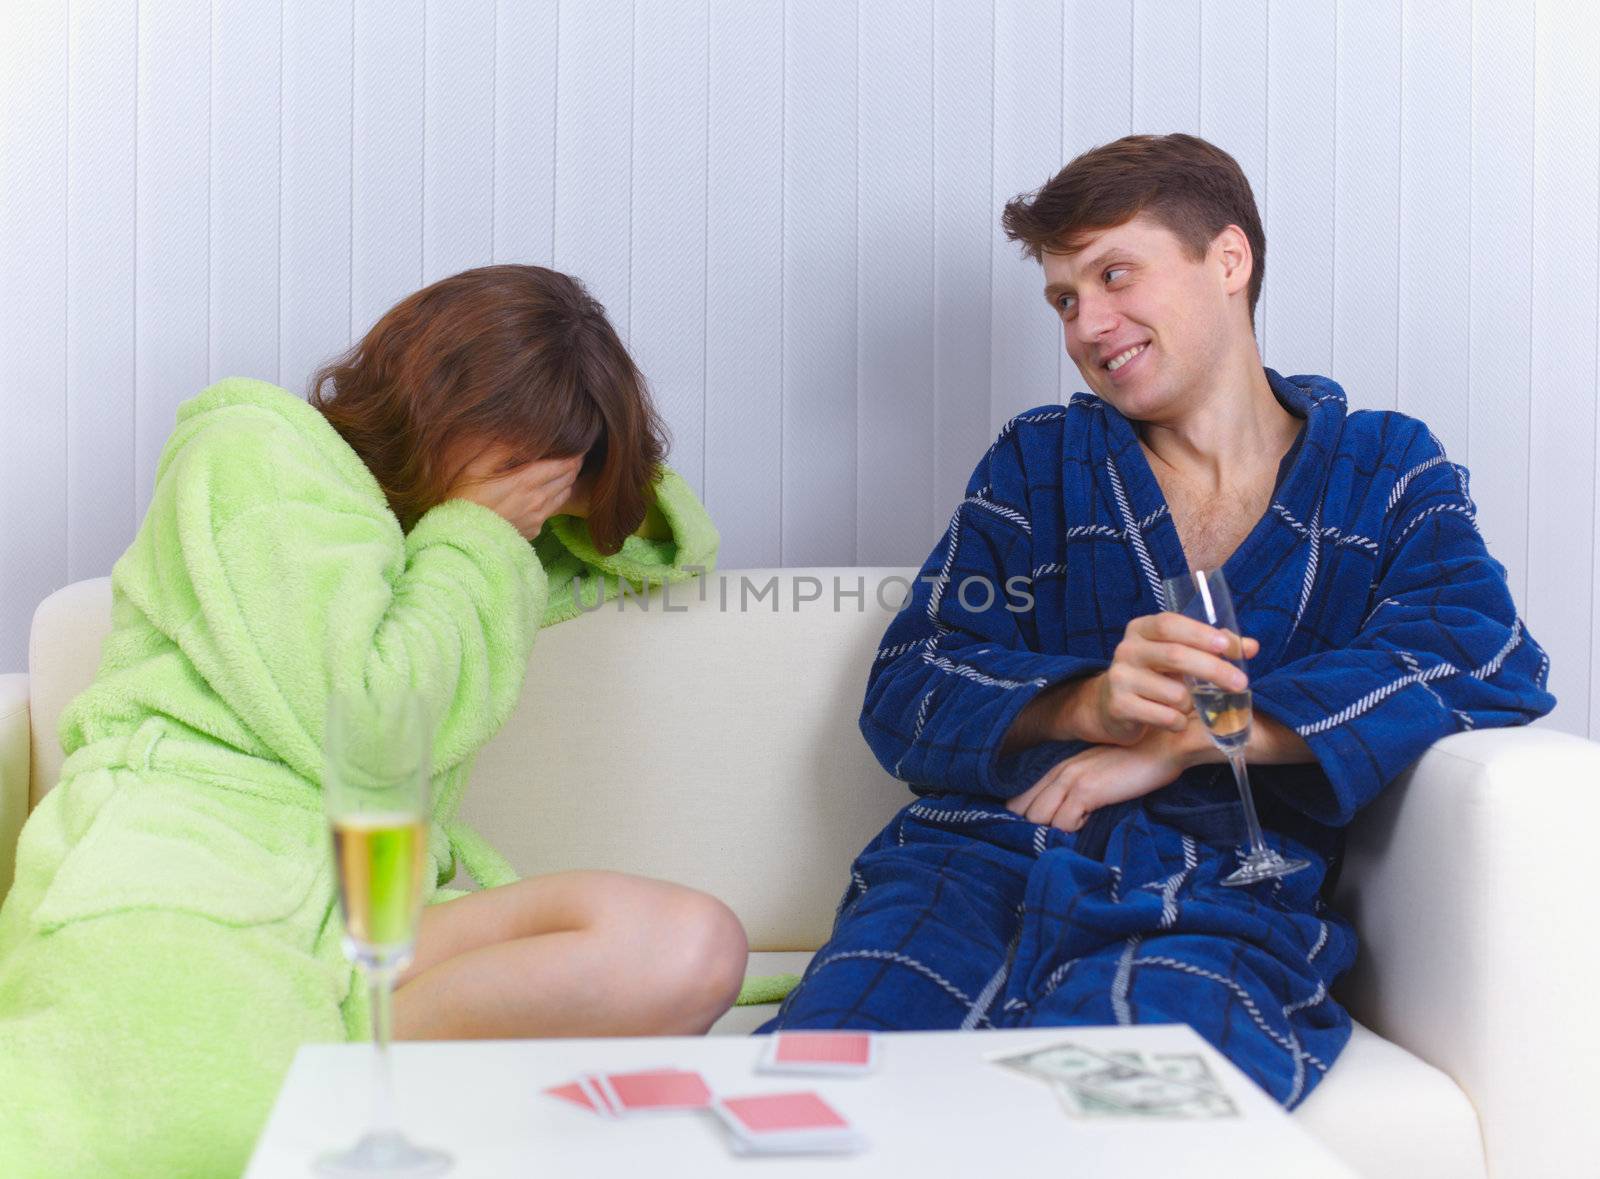 Woman has lost in cards to man and cries by pzaxe